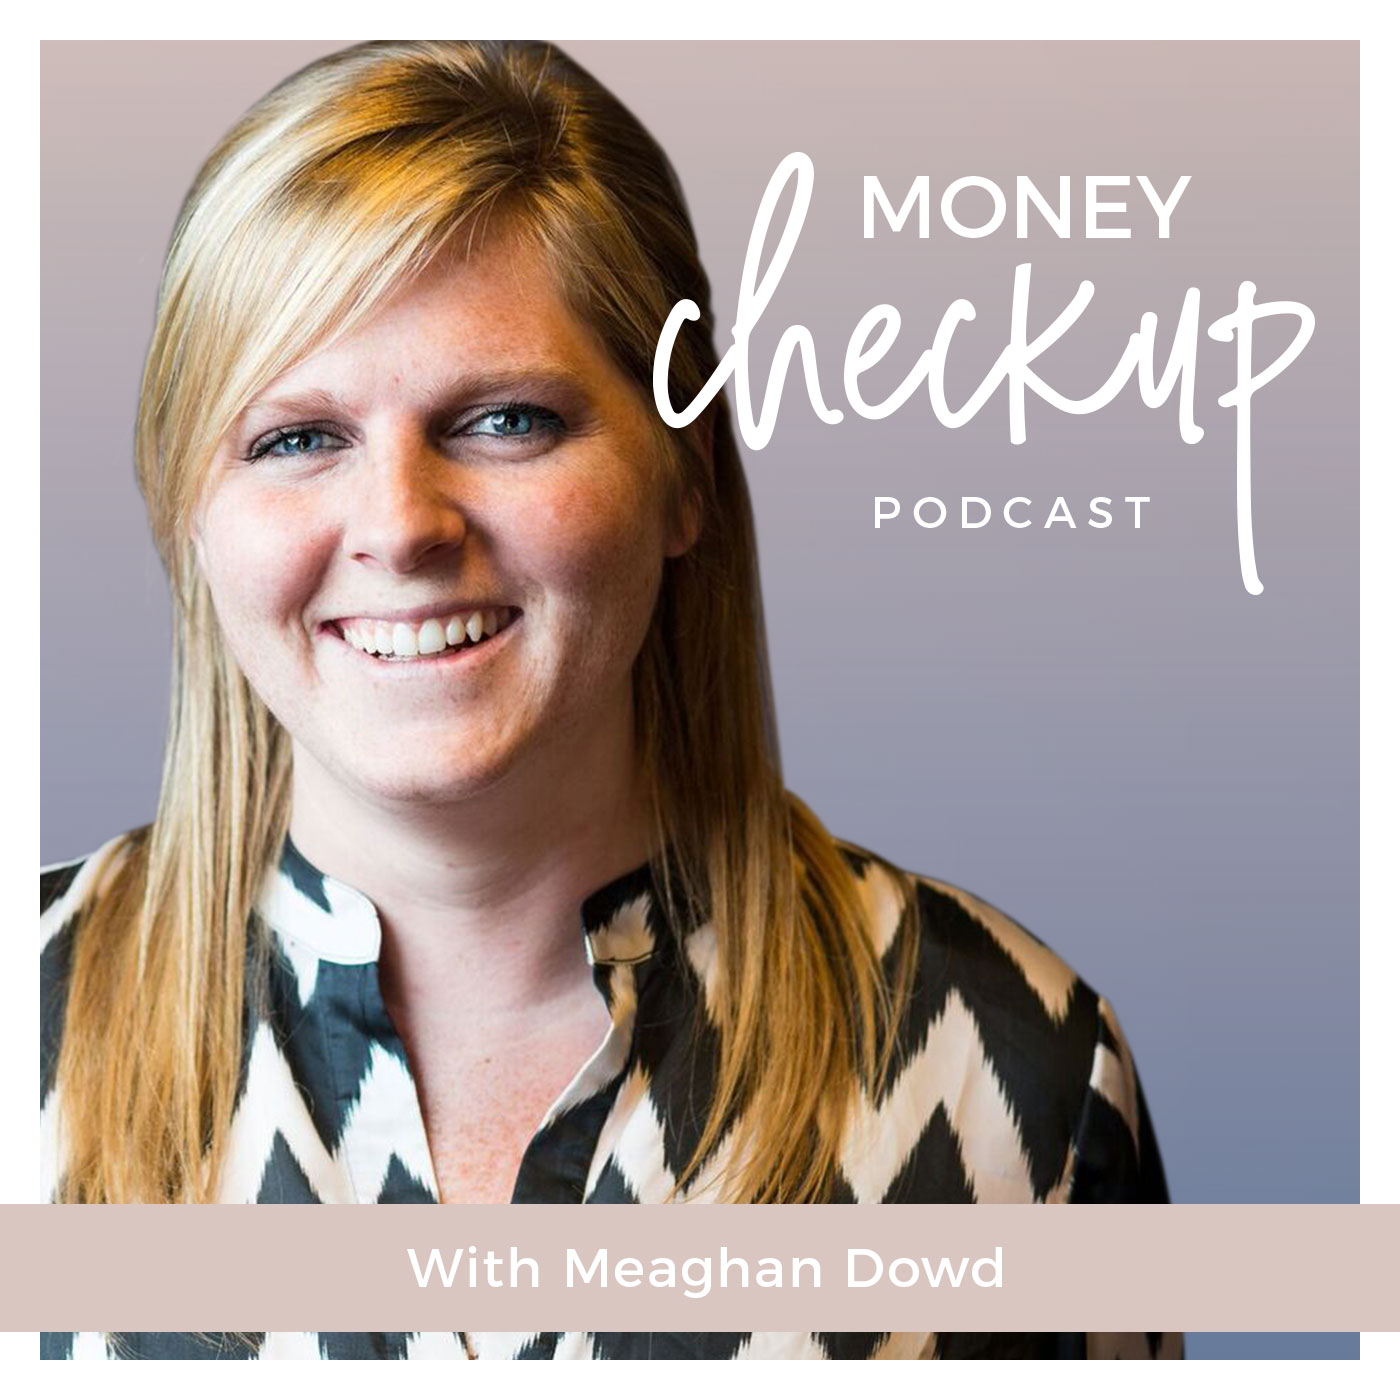 Money Checkup Podcast With Meaghan Dowd